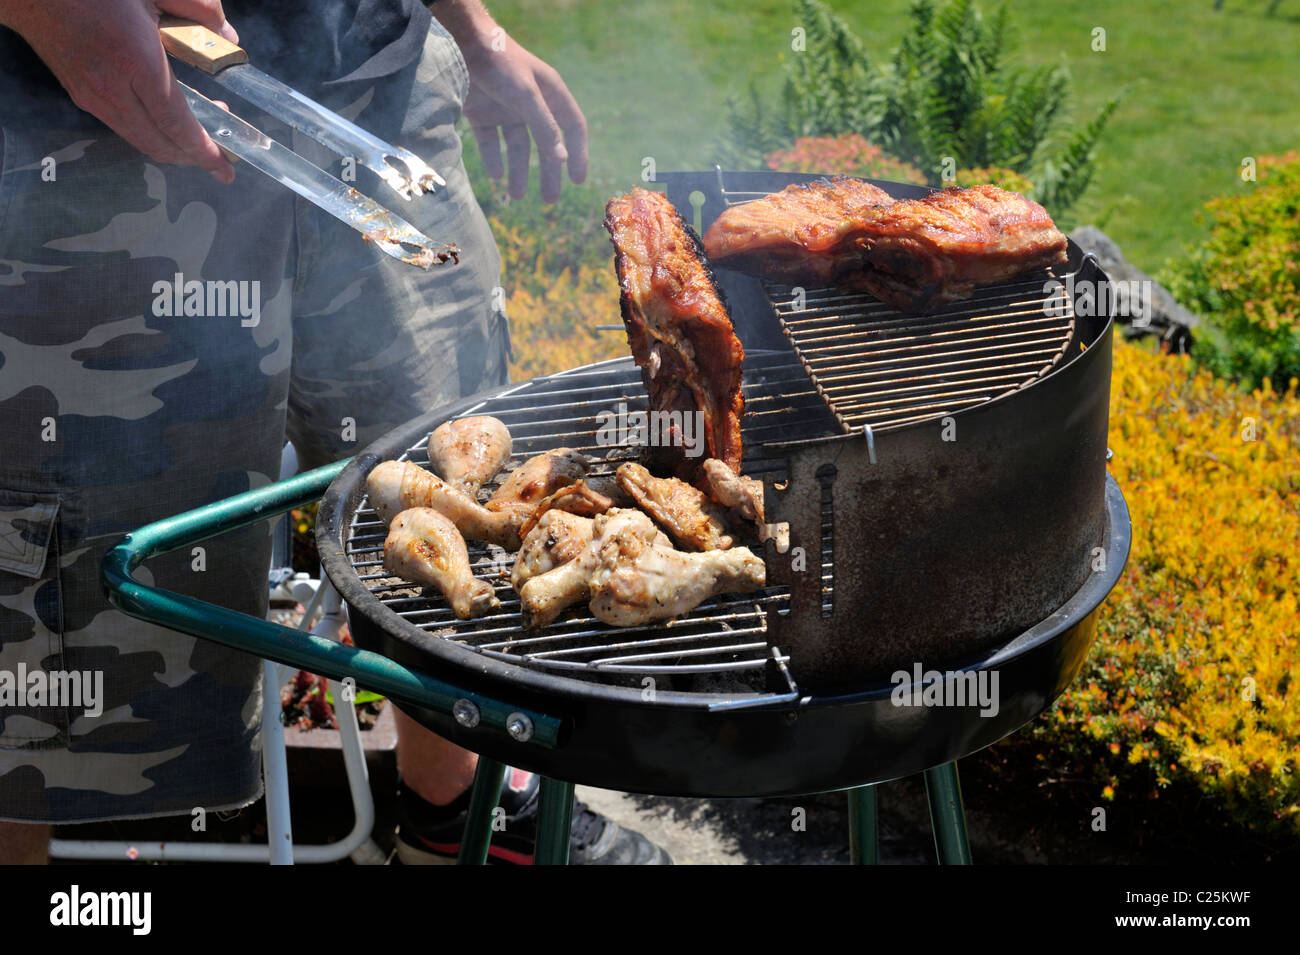 Cooking chicken and ribs on barbecue Stock Photo